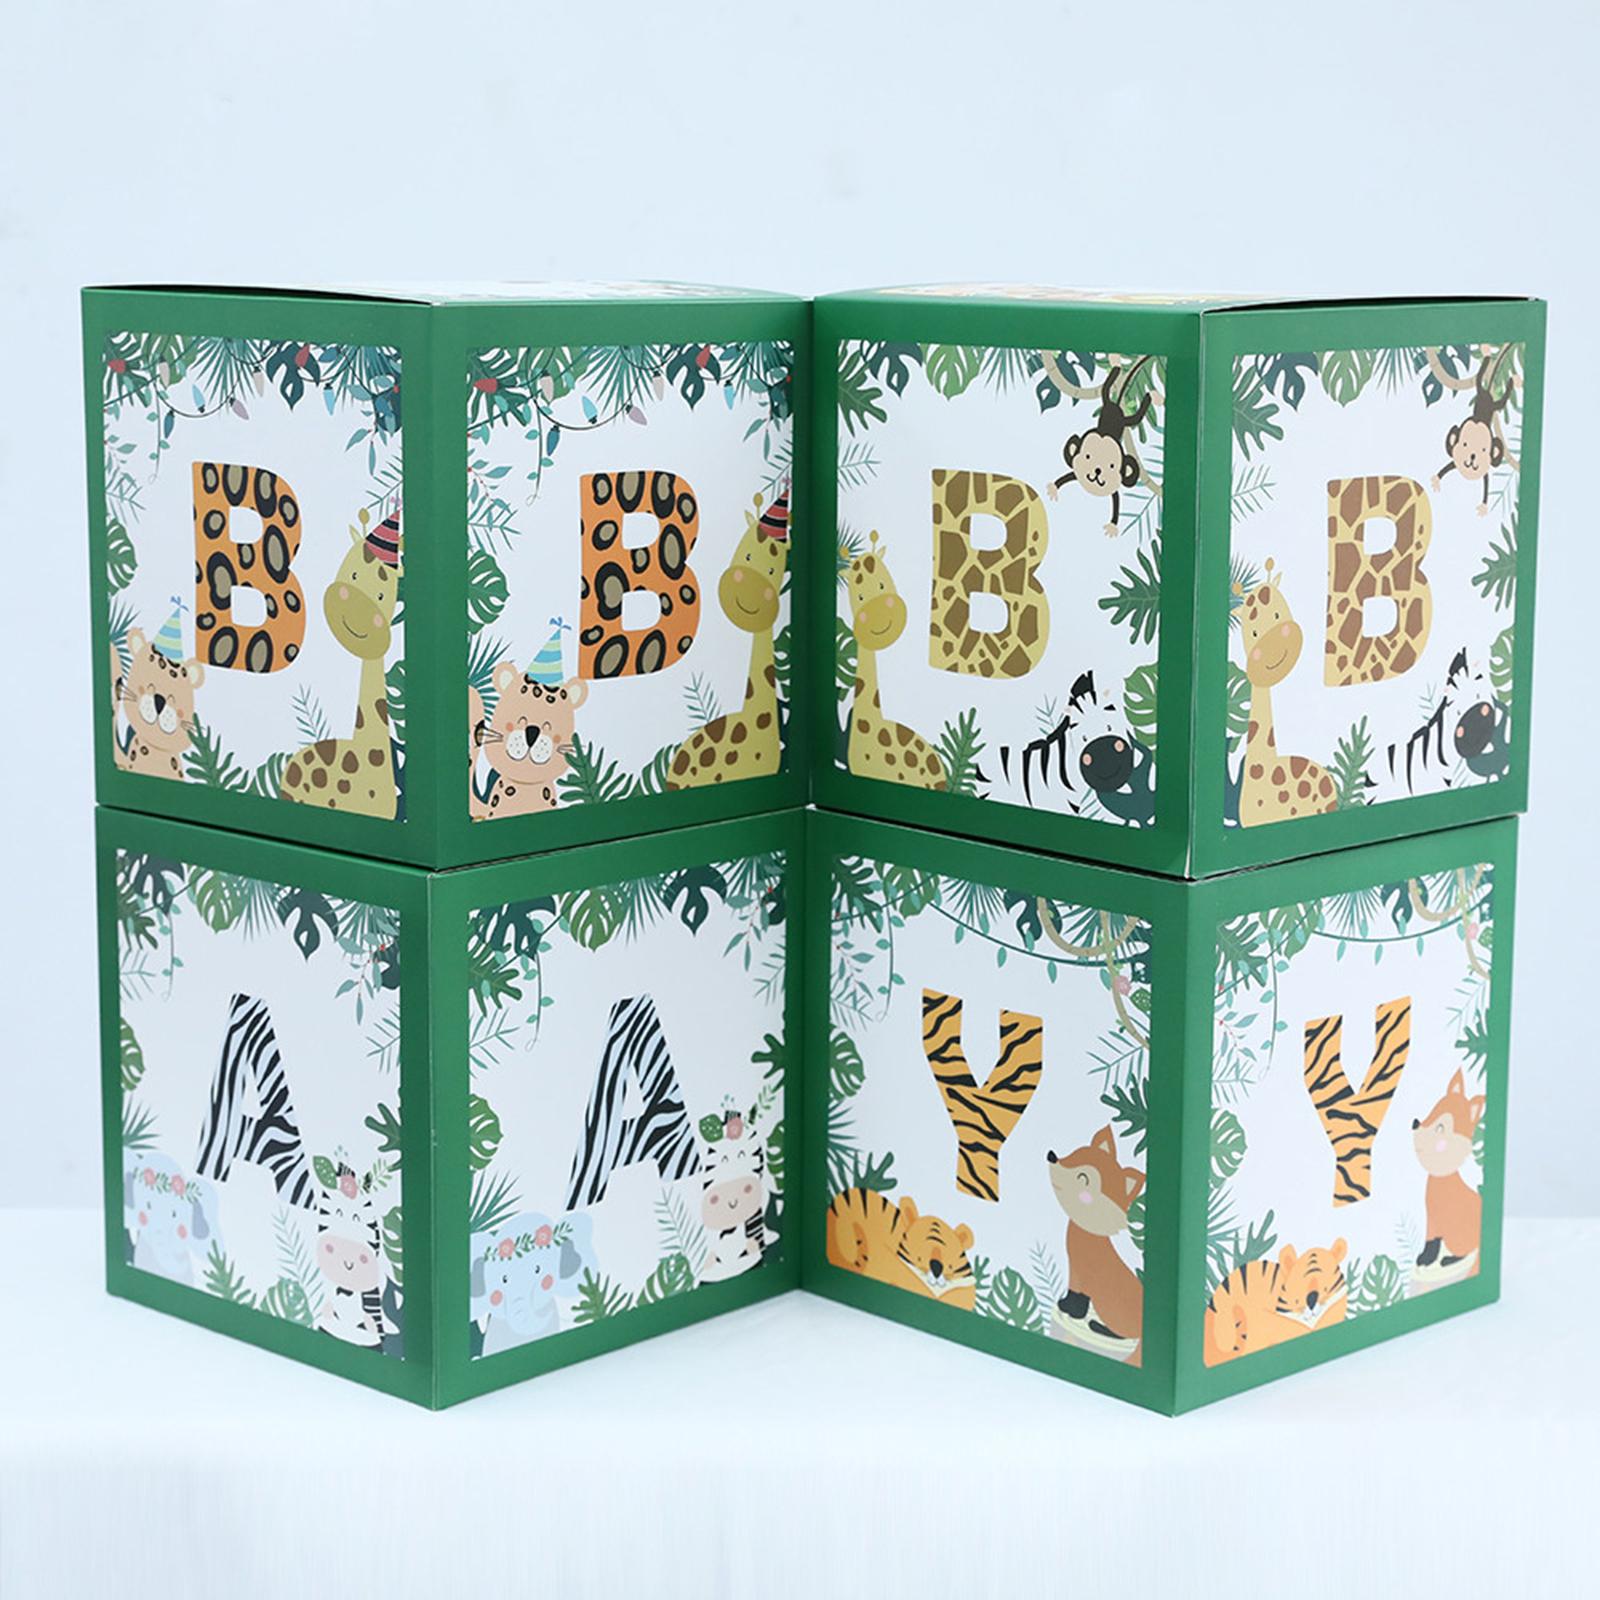 4x Jungle Animals Ballons Box Decorations for Baby Shower Party Wedding